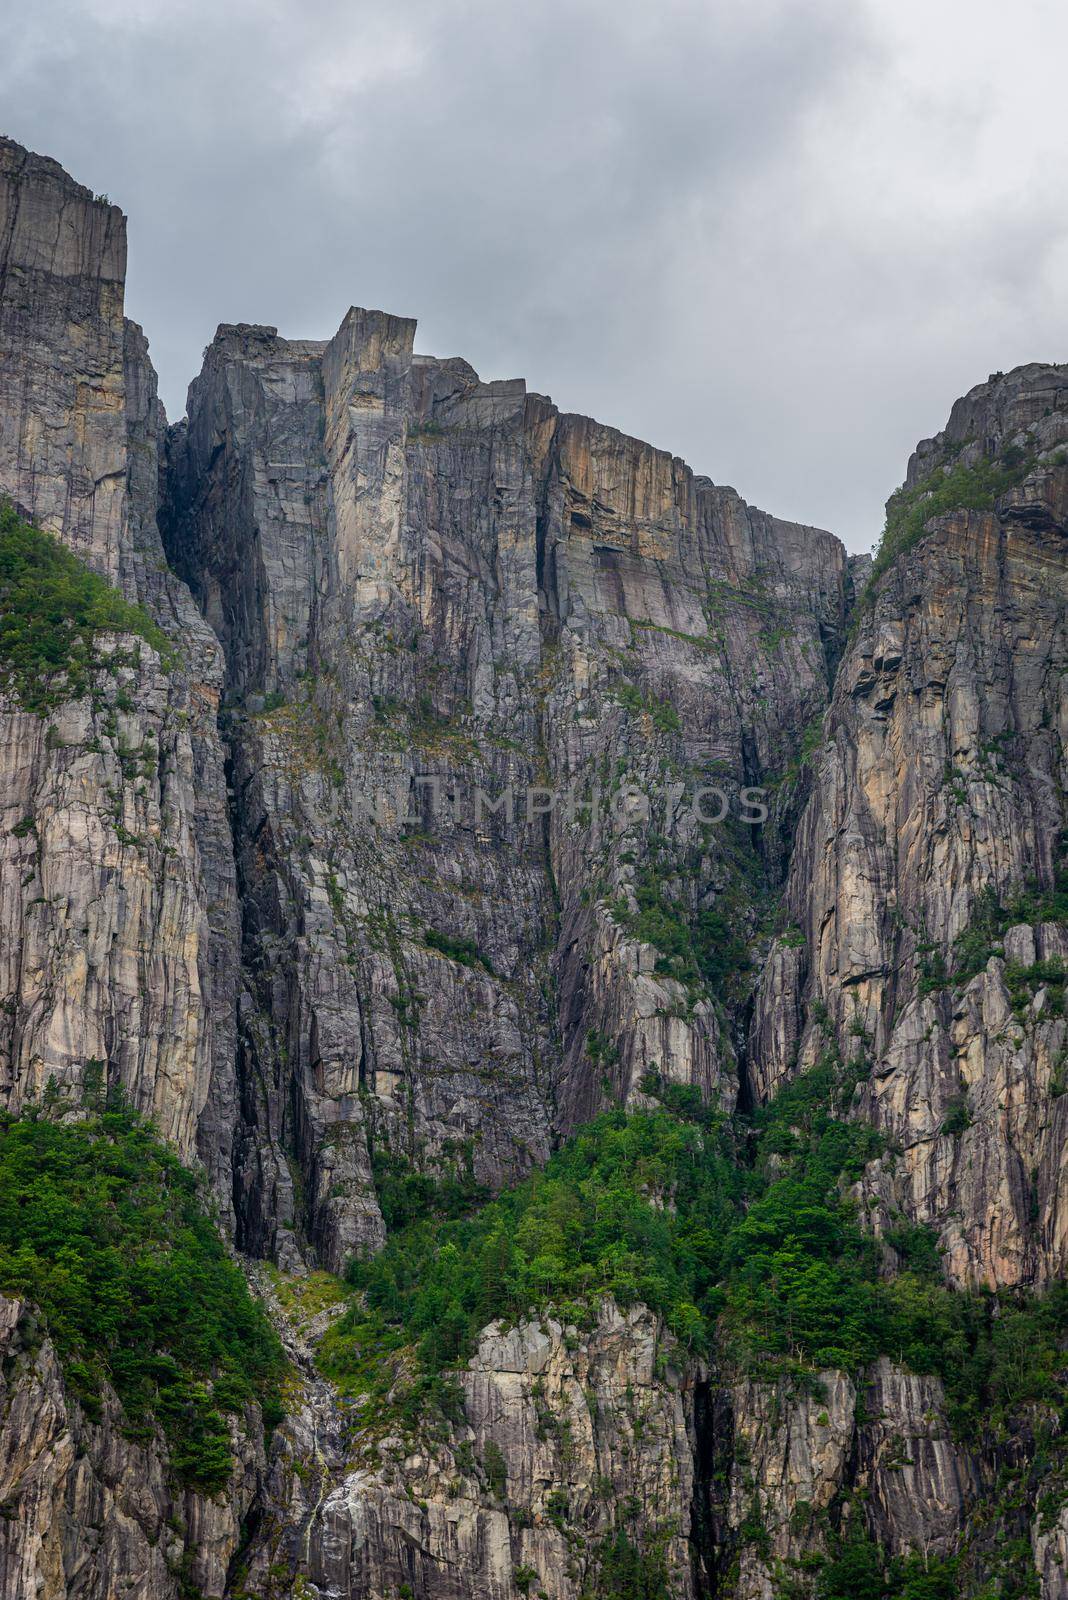 View of the Pulpit Rock - seen from Lysefjorden. Pulpit Rock is one of the most visited places in Norway, and gives a spectacular view of the fjords and mountains.